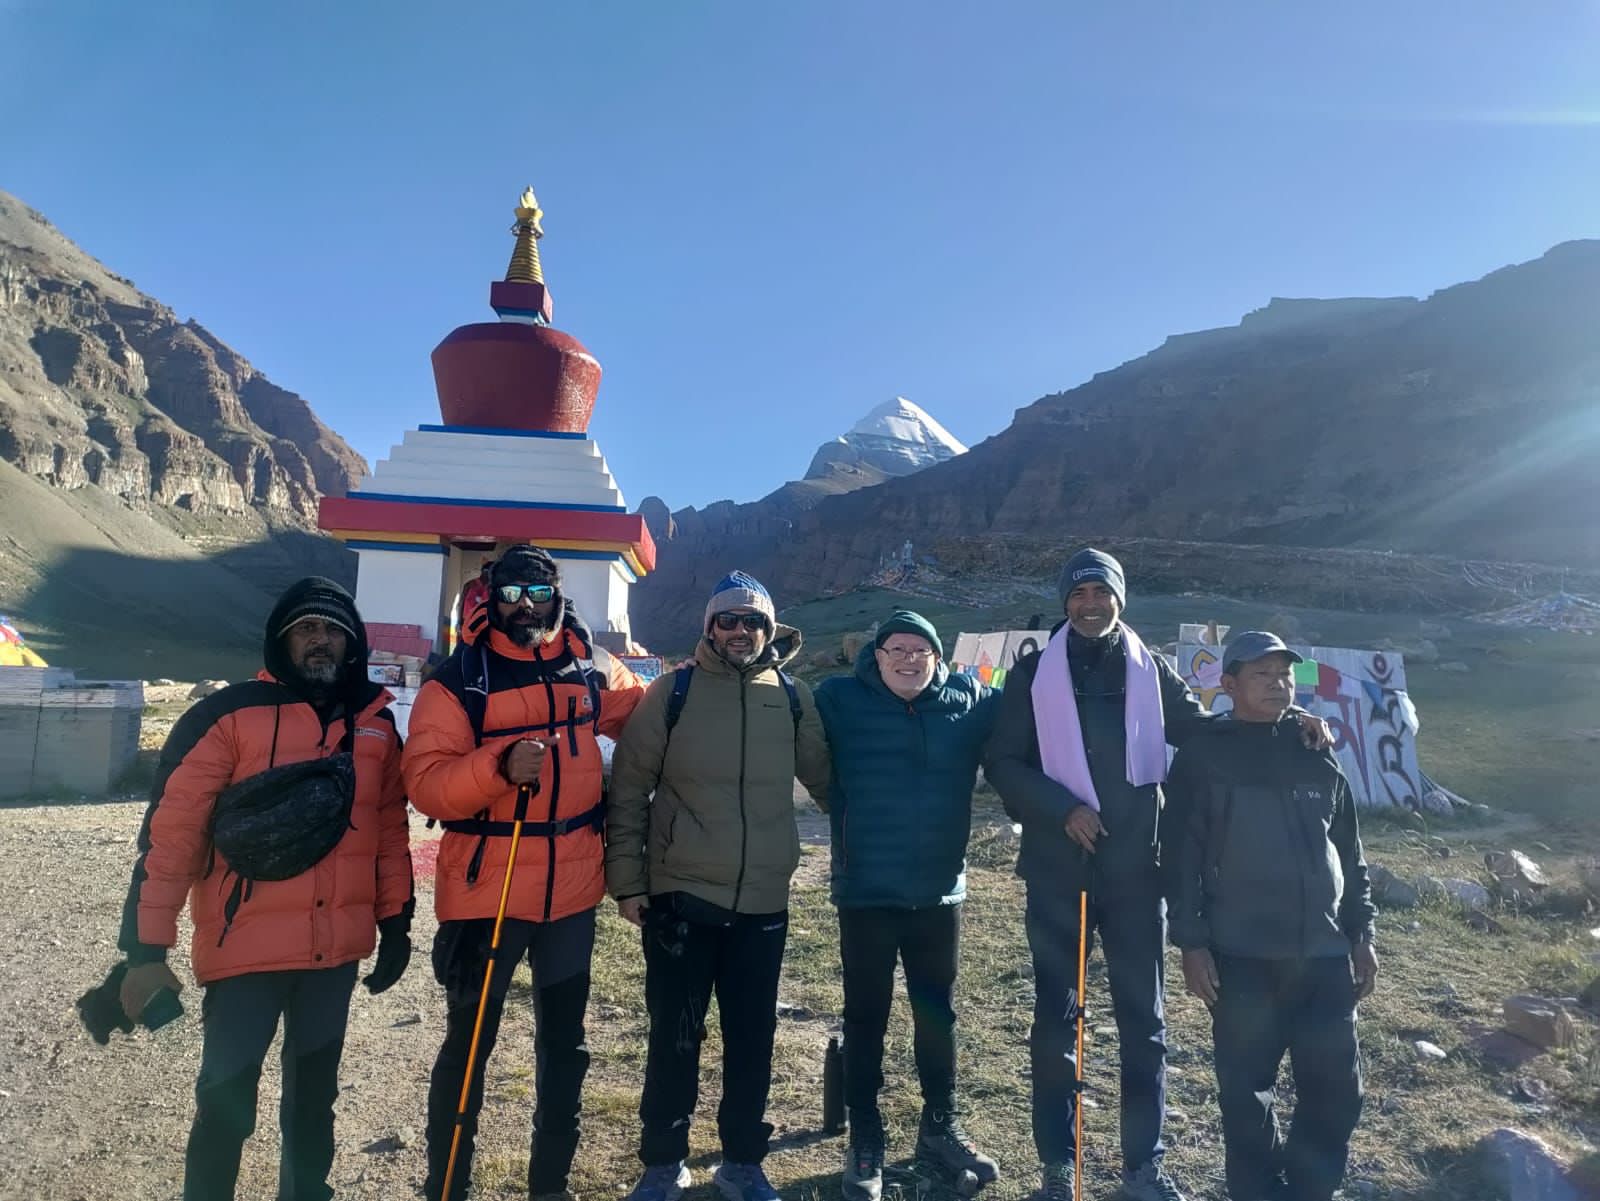 What are the requirements for Kailash Mansarovar Yatra?